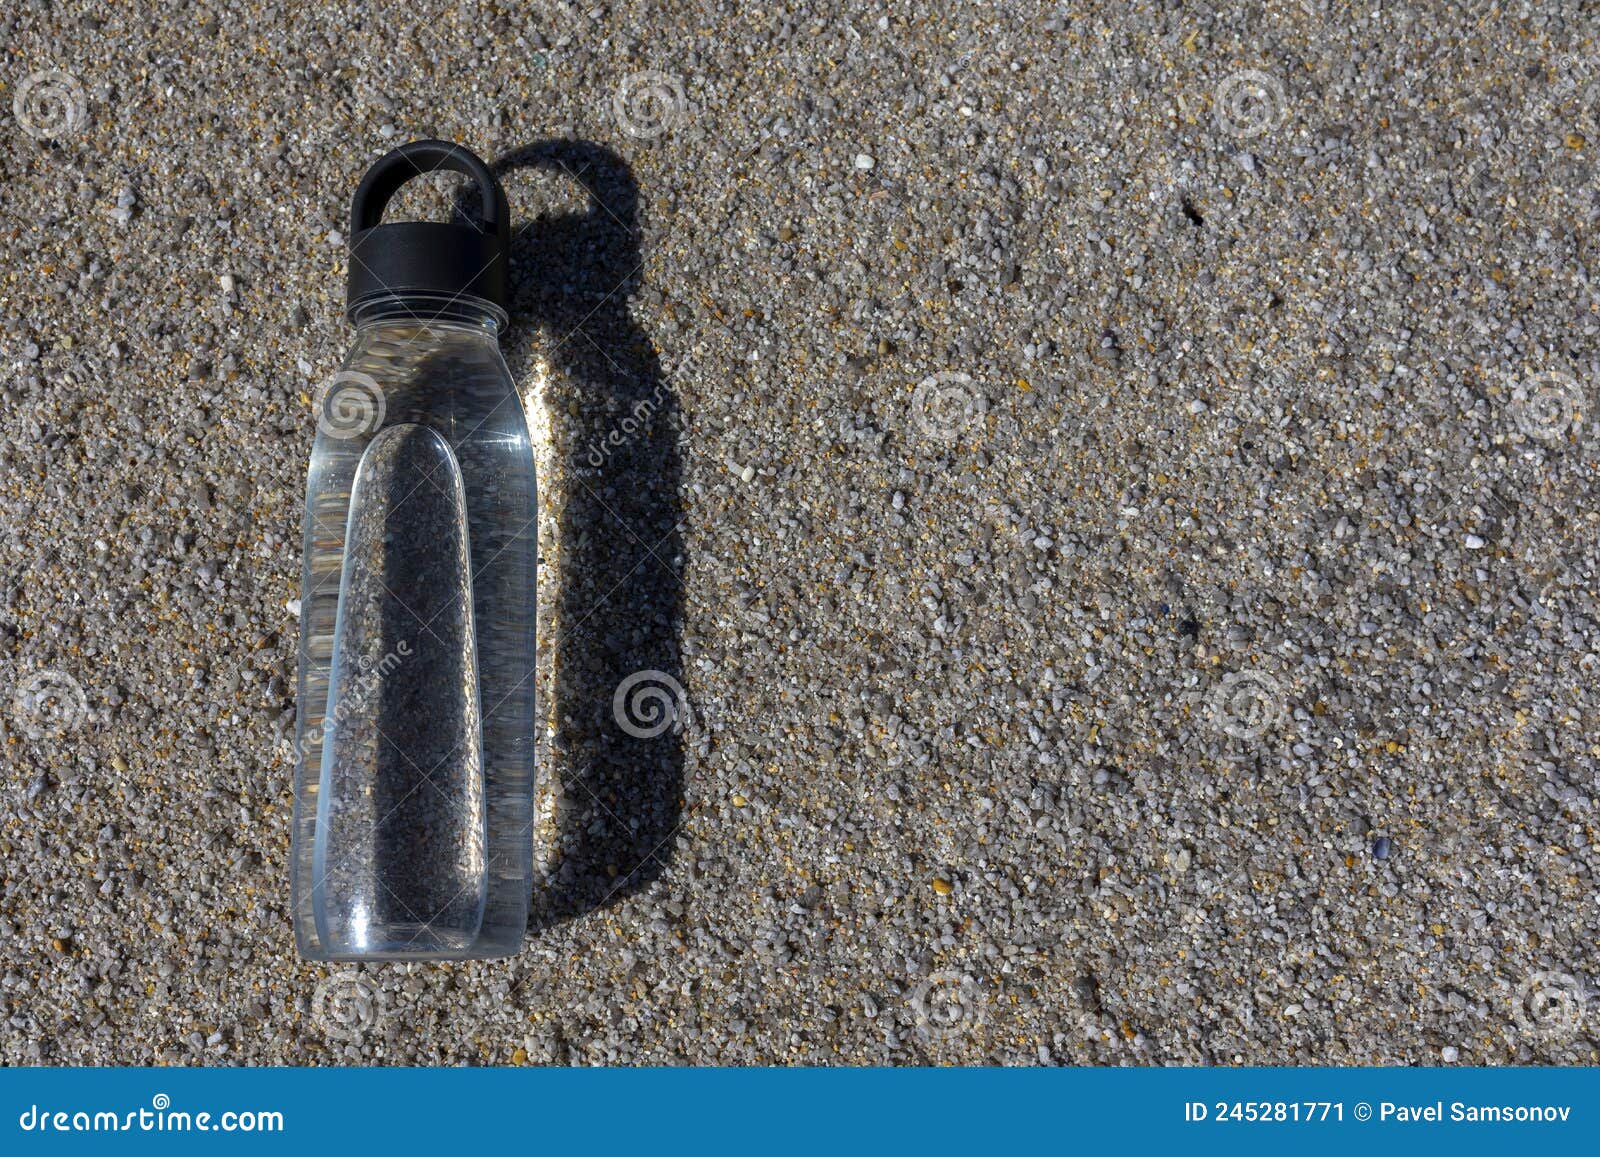 a clear bottle of water lies on the sand.